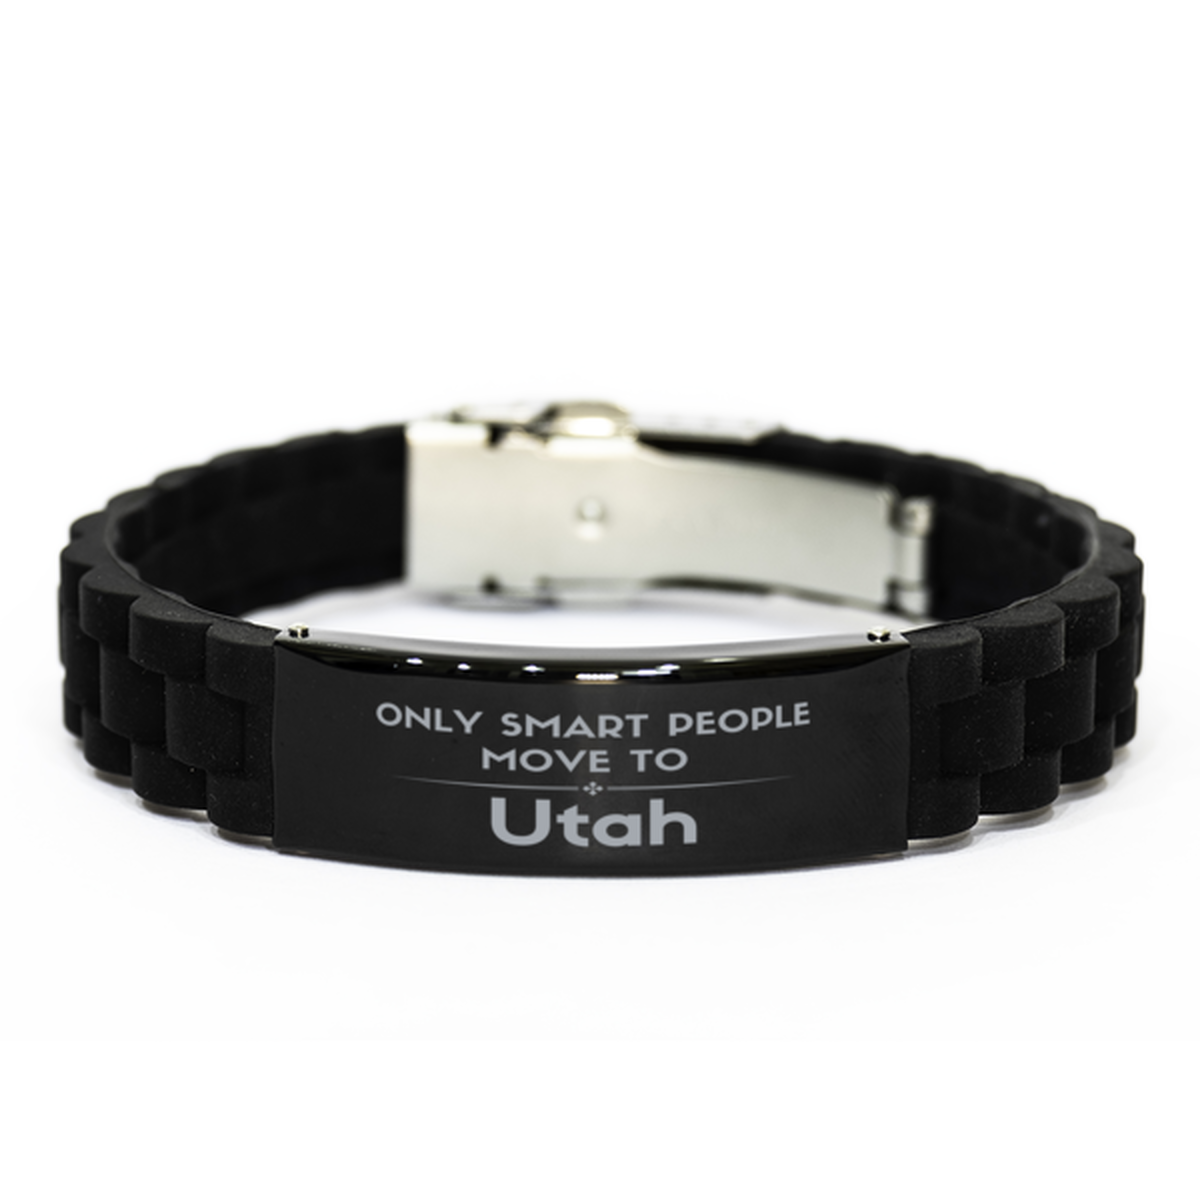 Only smart people move to Utah Black Glidelock Clasp Bracelet, Gag Gifts For Utah, Move to Utah Gifts for Friends Coworker Funny Saying Quote